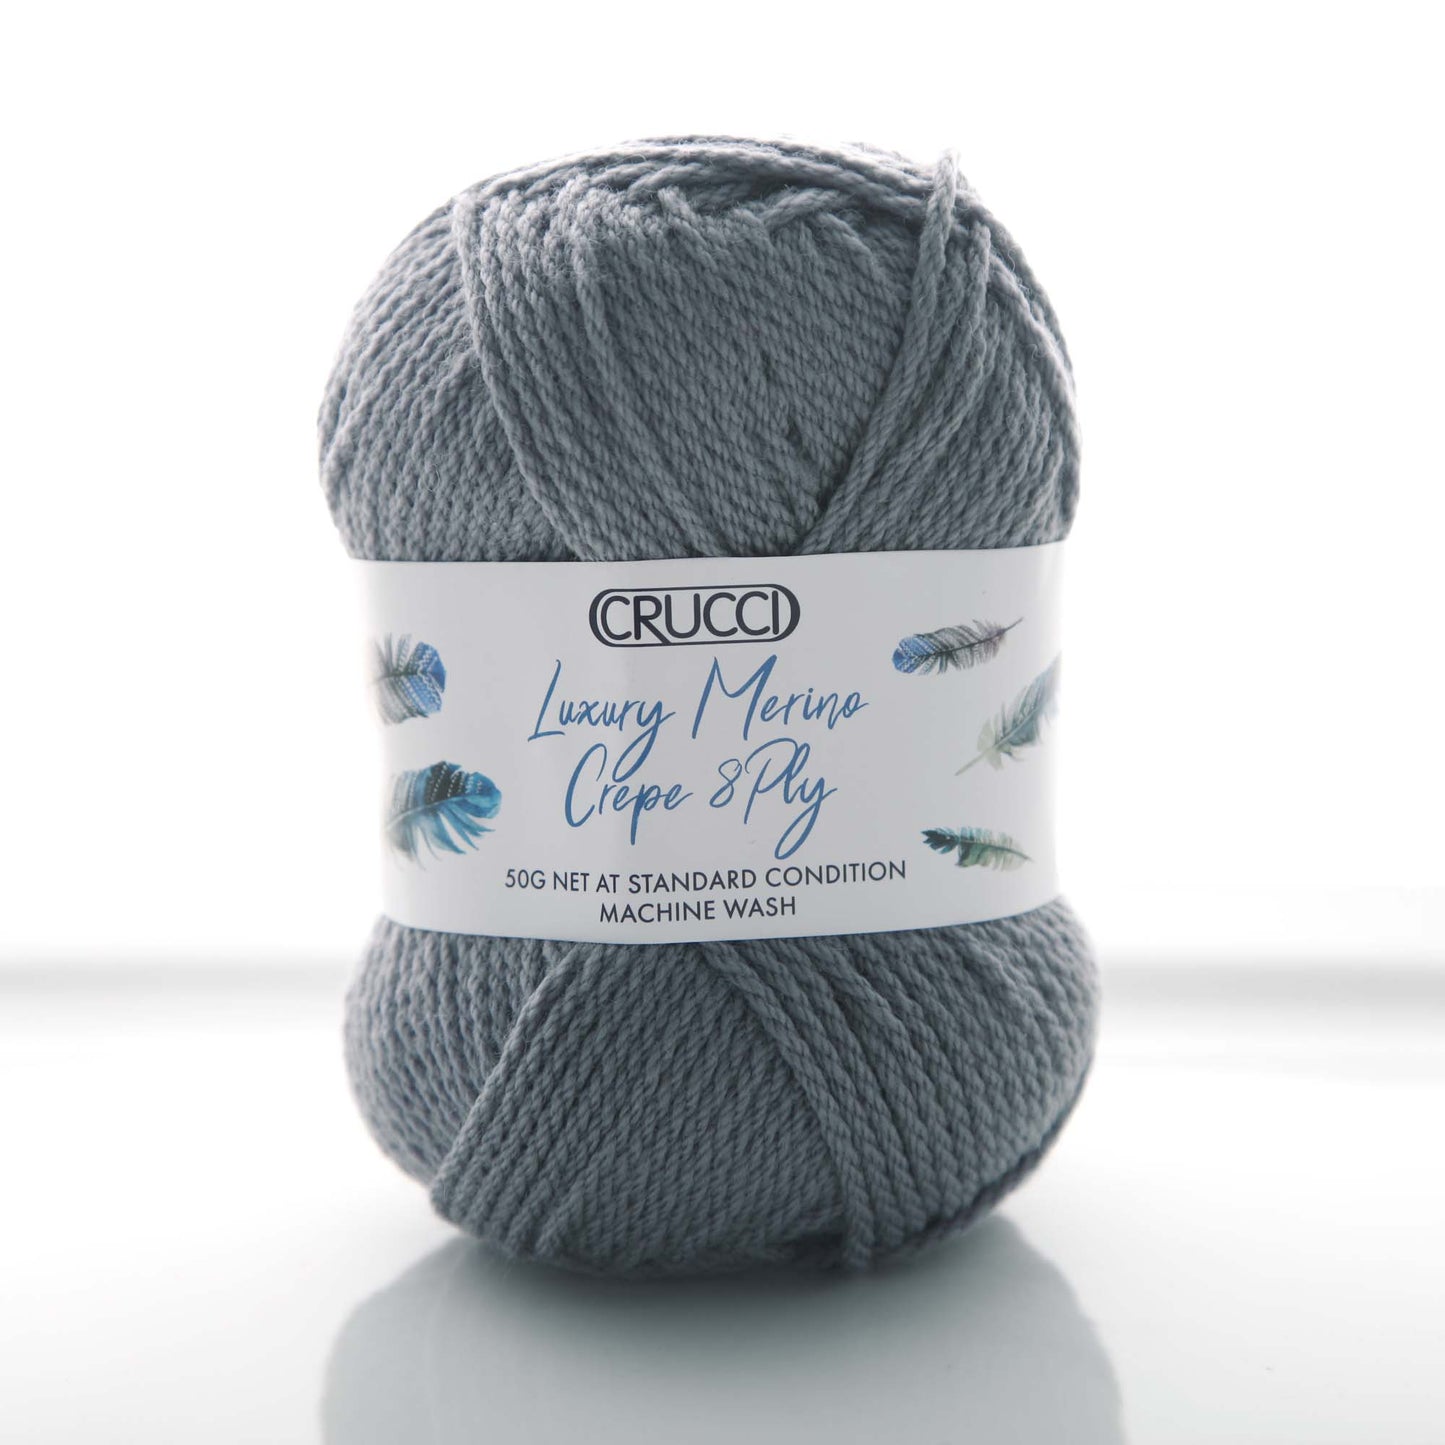 Luxury Merino Crepe 8 Ply - special price - now only $9.90 per ball